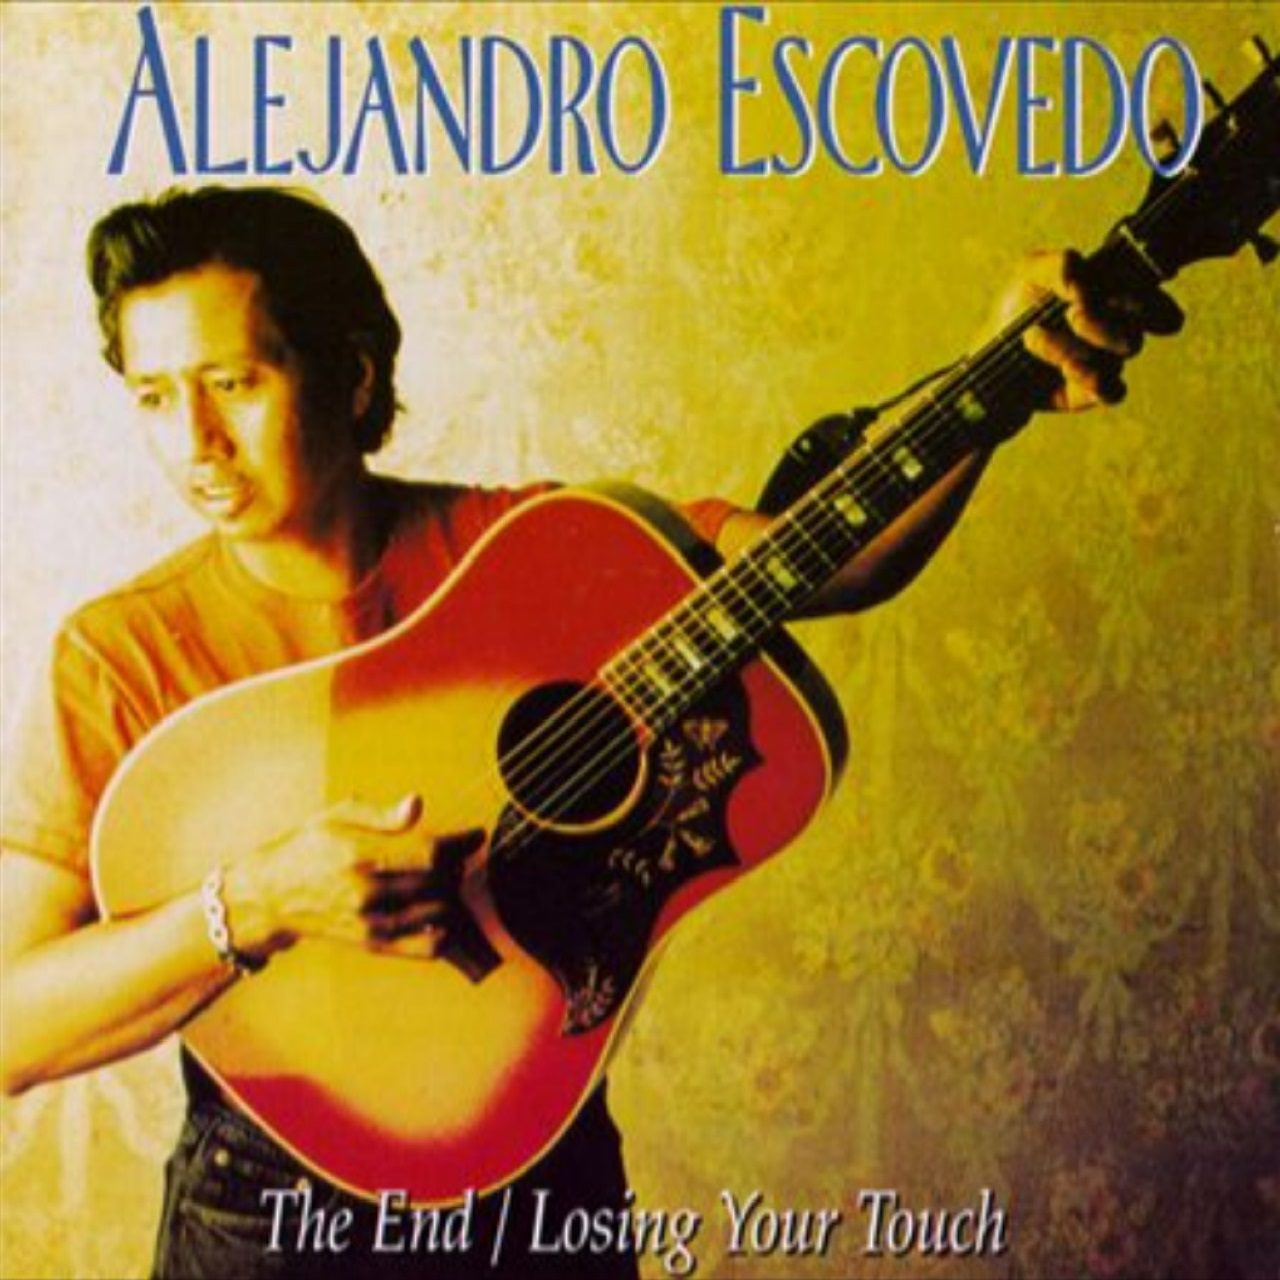 Alejandro Escovedo – The End/Losing Your Touch cover album